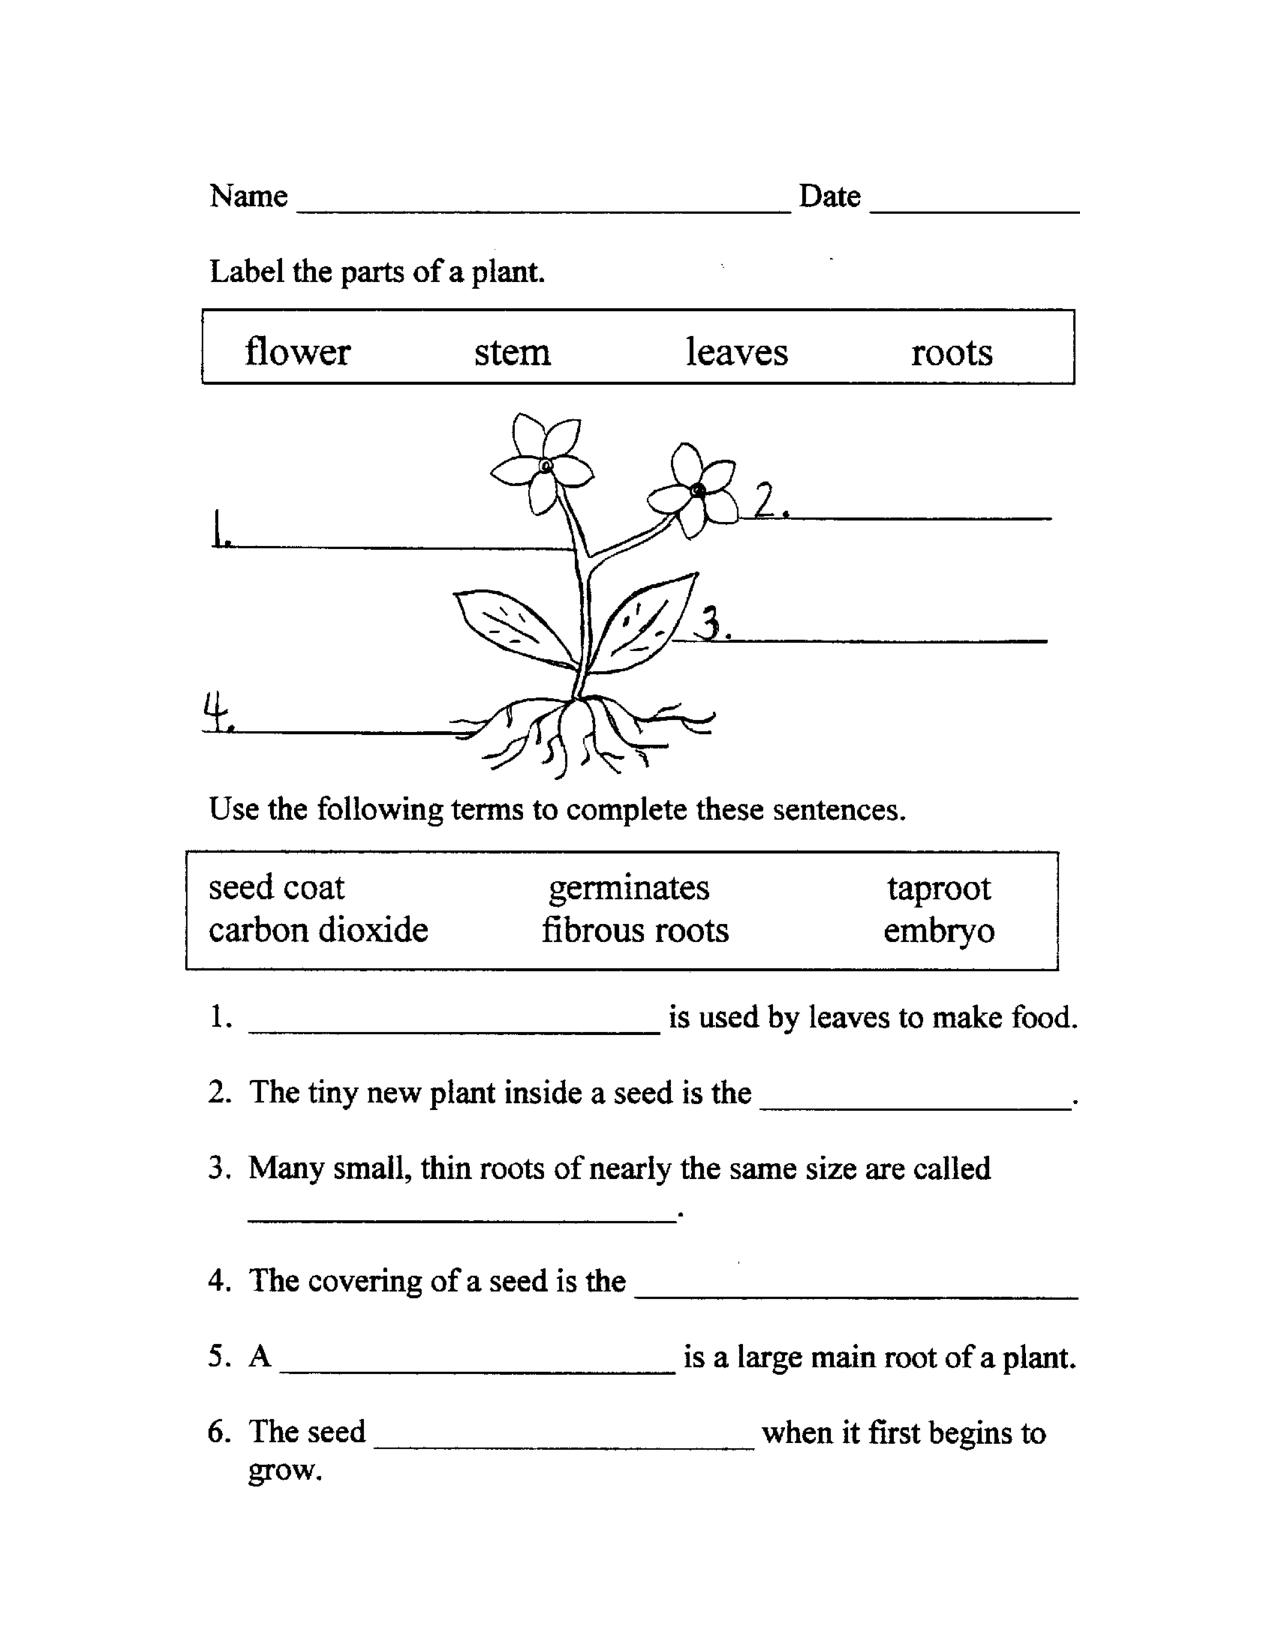 13-best-images-of-plant-parts-and-functions-worksheet-label-plant